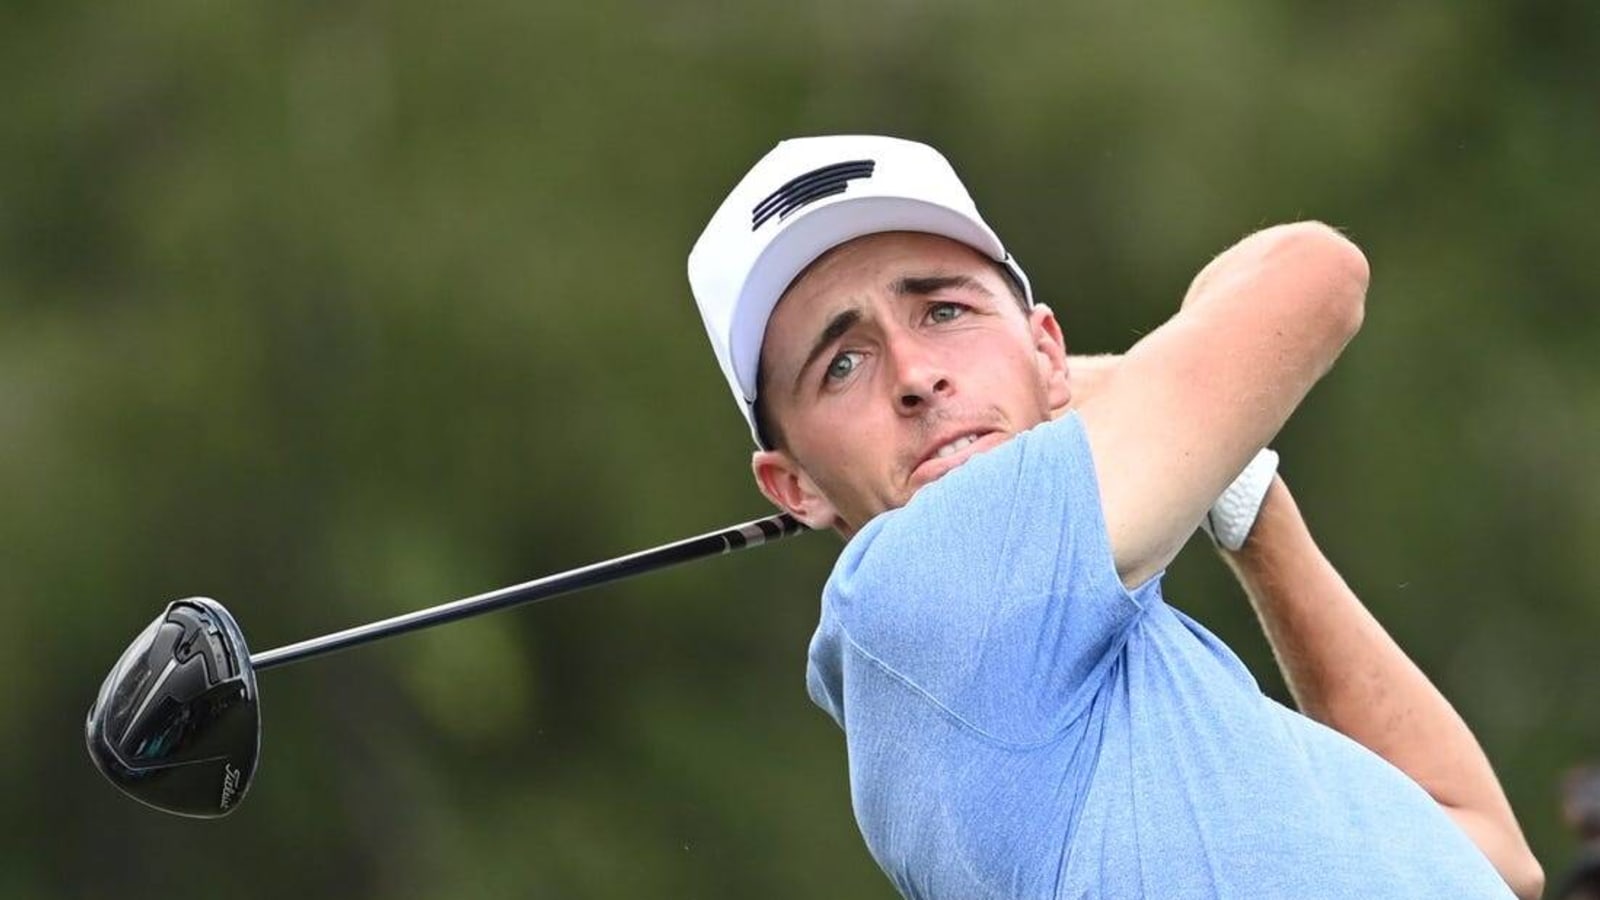 David Puig earns share of lead at LIV Greenbrier